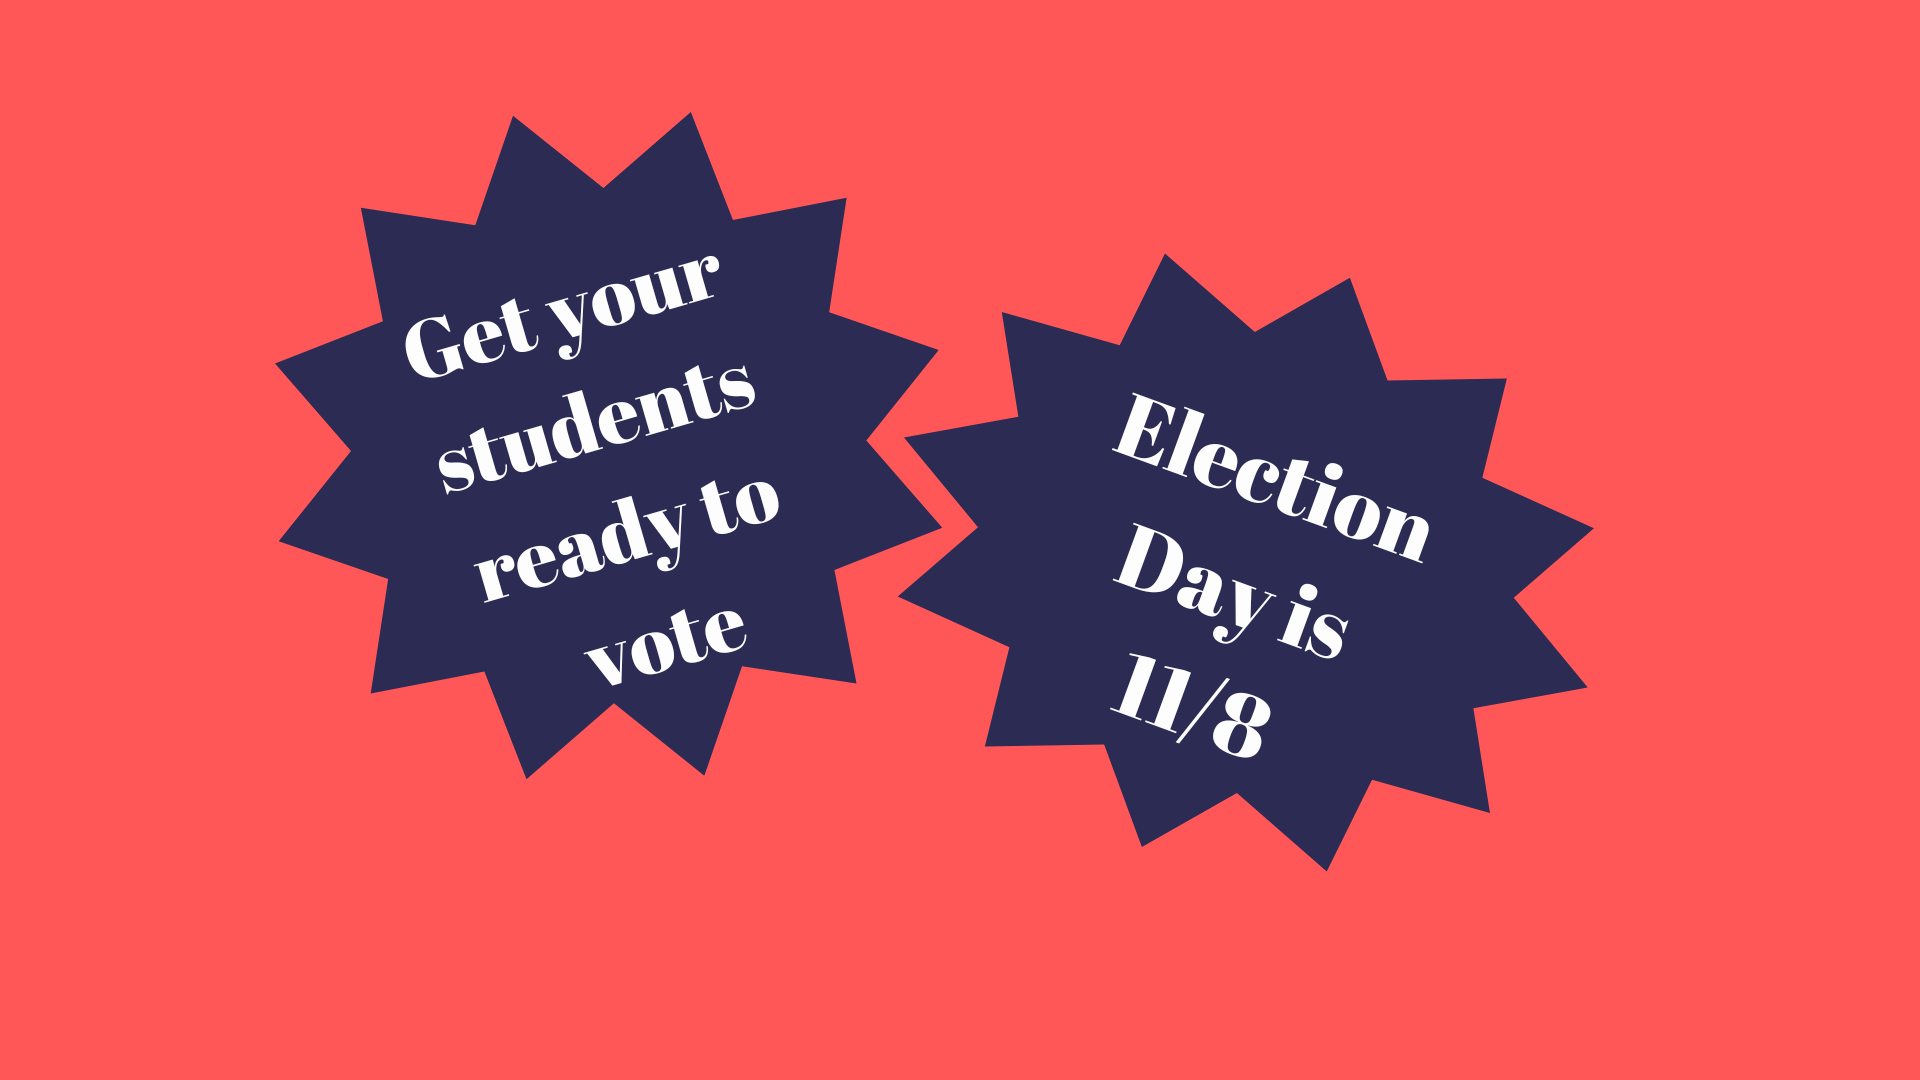 Get Your Students Ready to Vote! Election Day is 11/8!